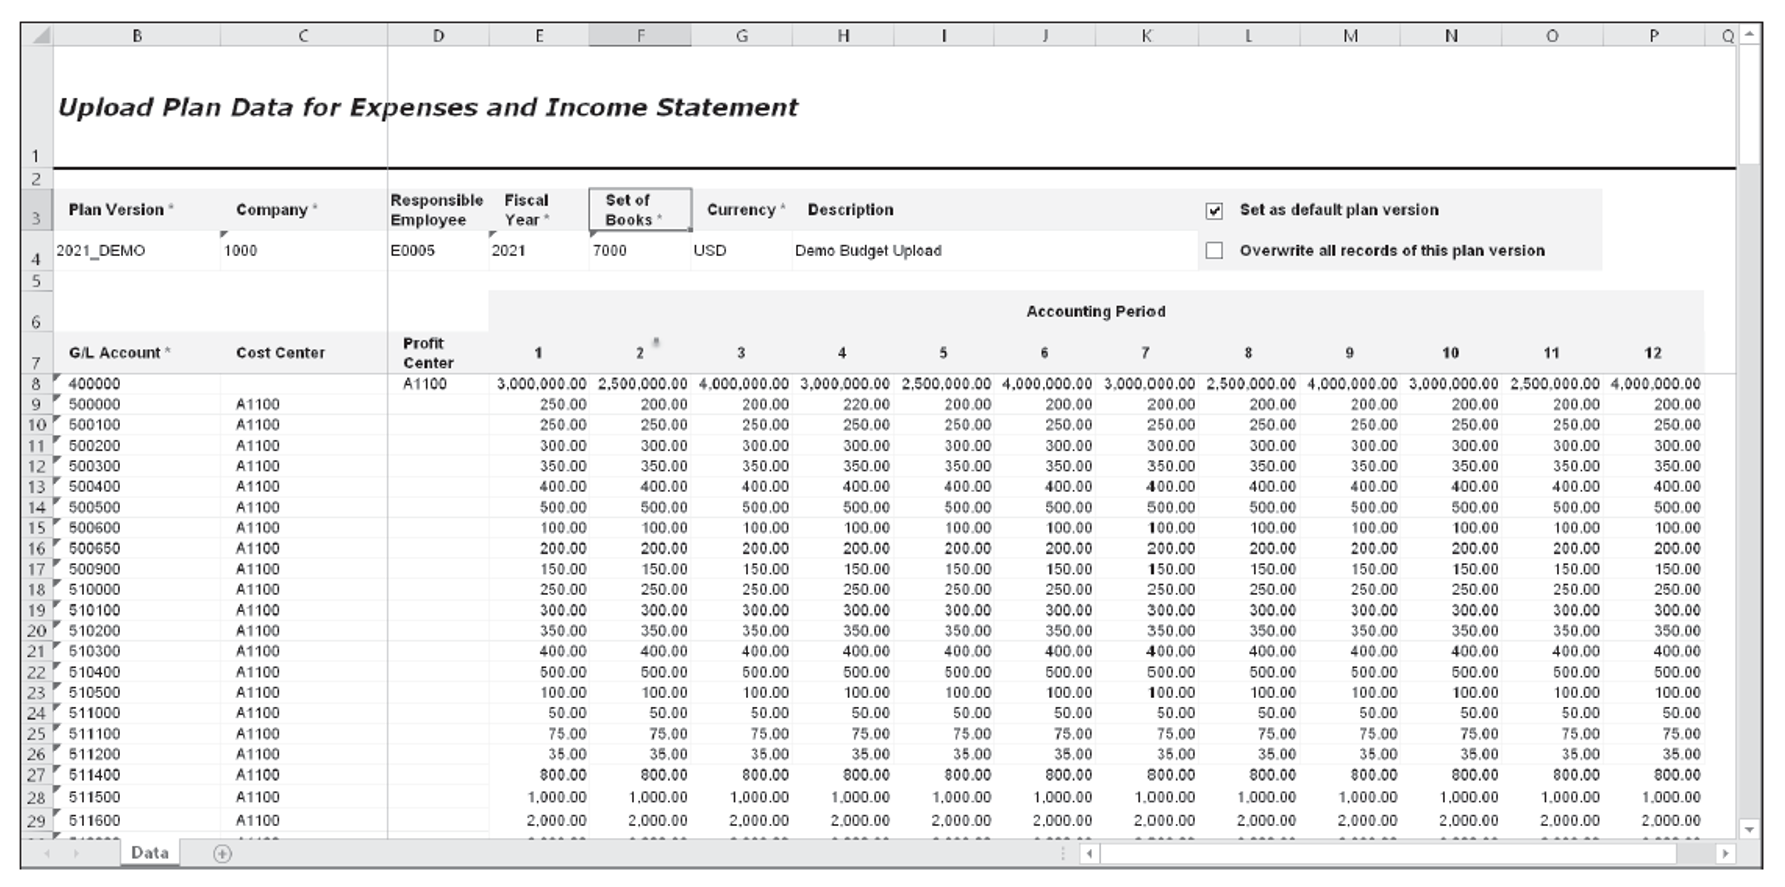 Upload Plan Data for Expenses and Income Statement